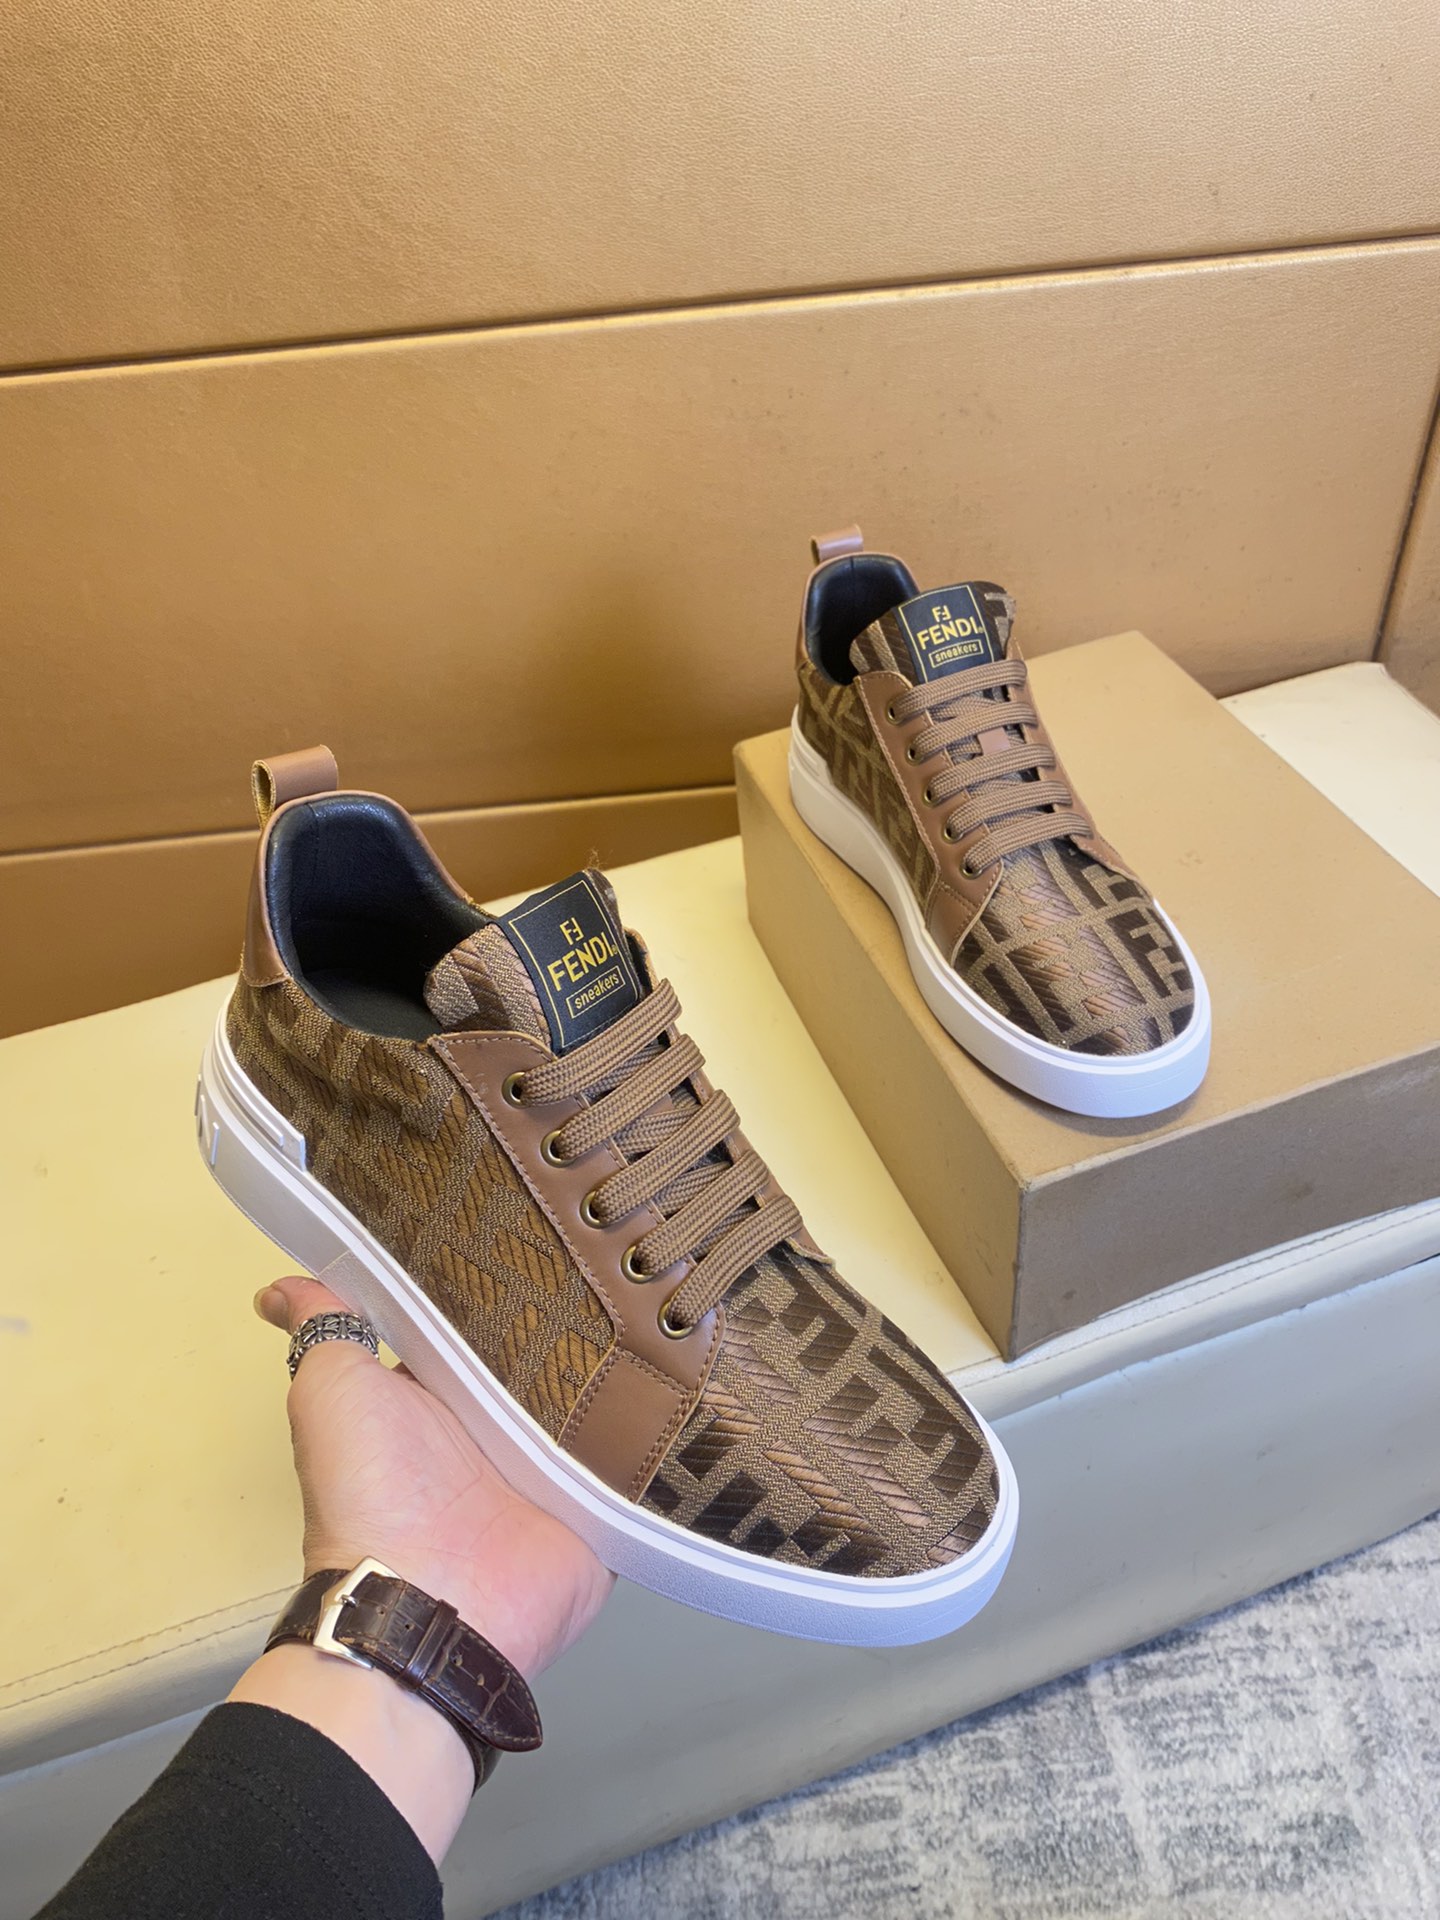 Exclusive first release of Fen ~ unique modern style sneakers. Counter purchasing casual shoes, orig